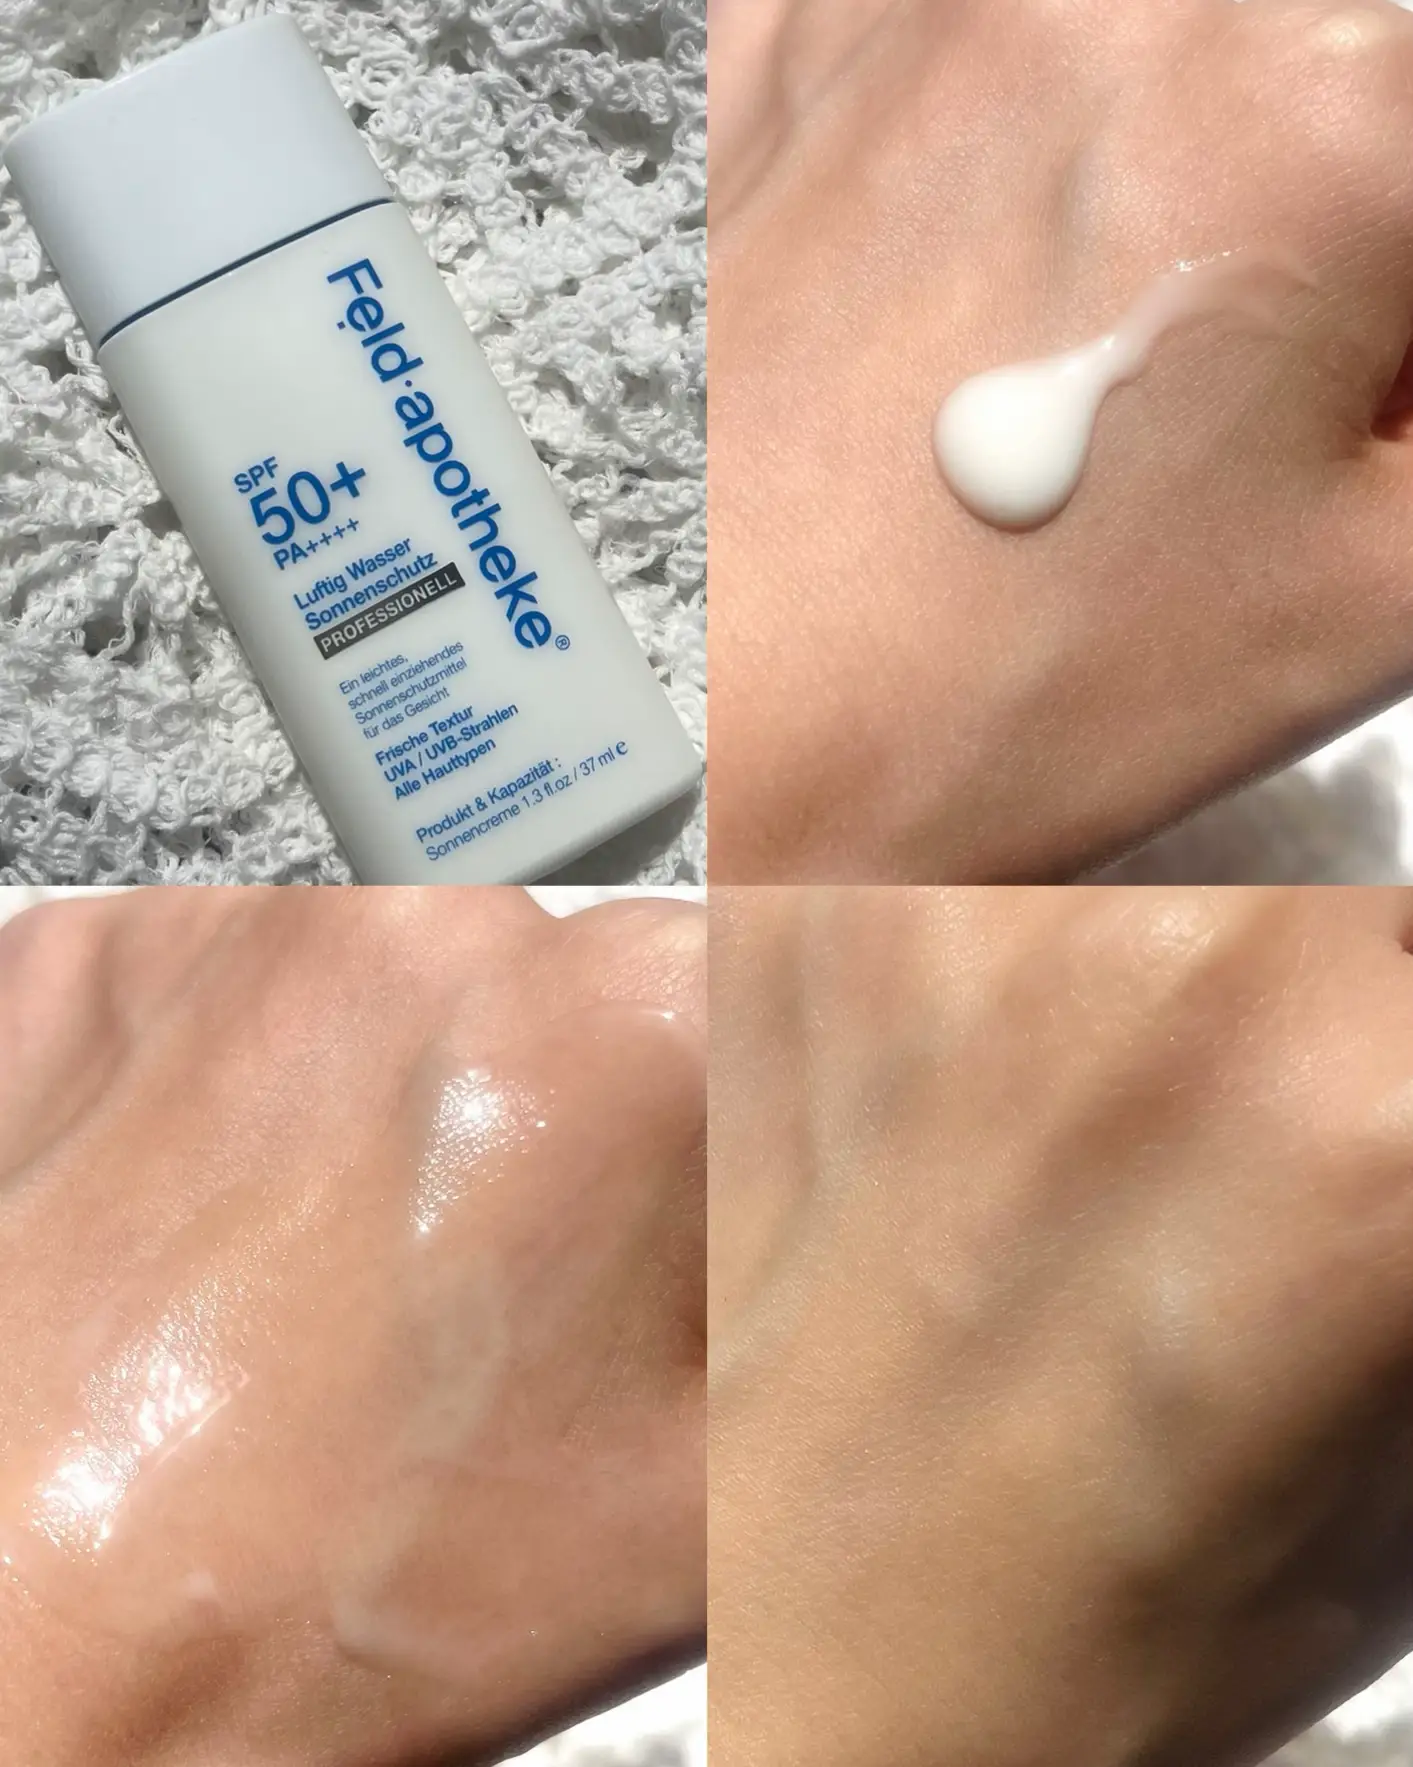 Sunscreen that blends in easily, Gallery posted by ふみか